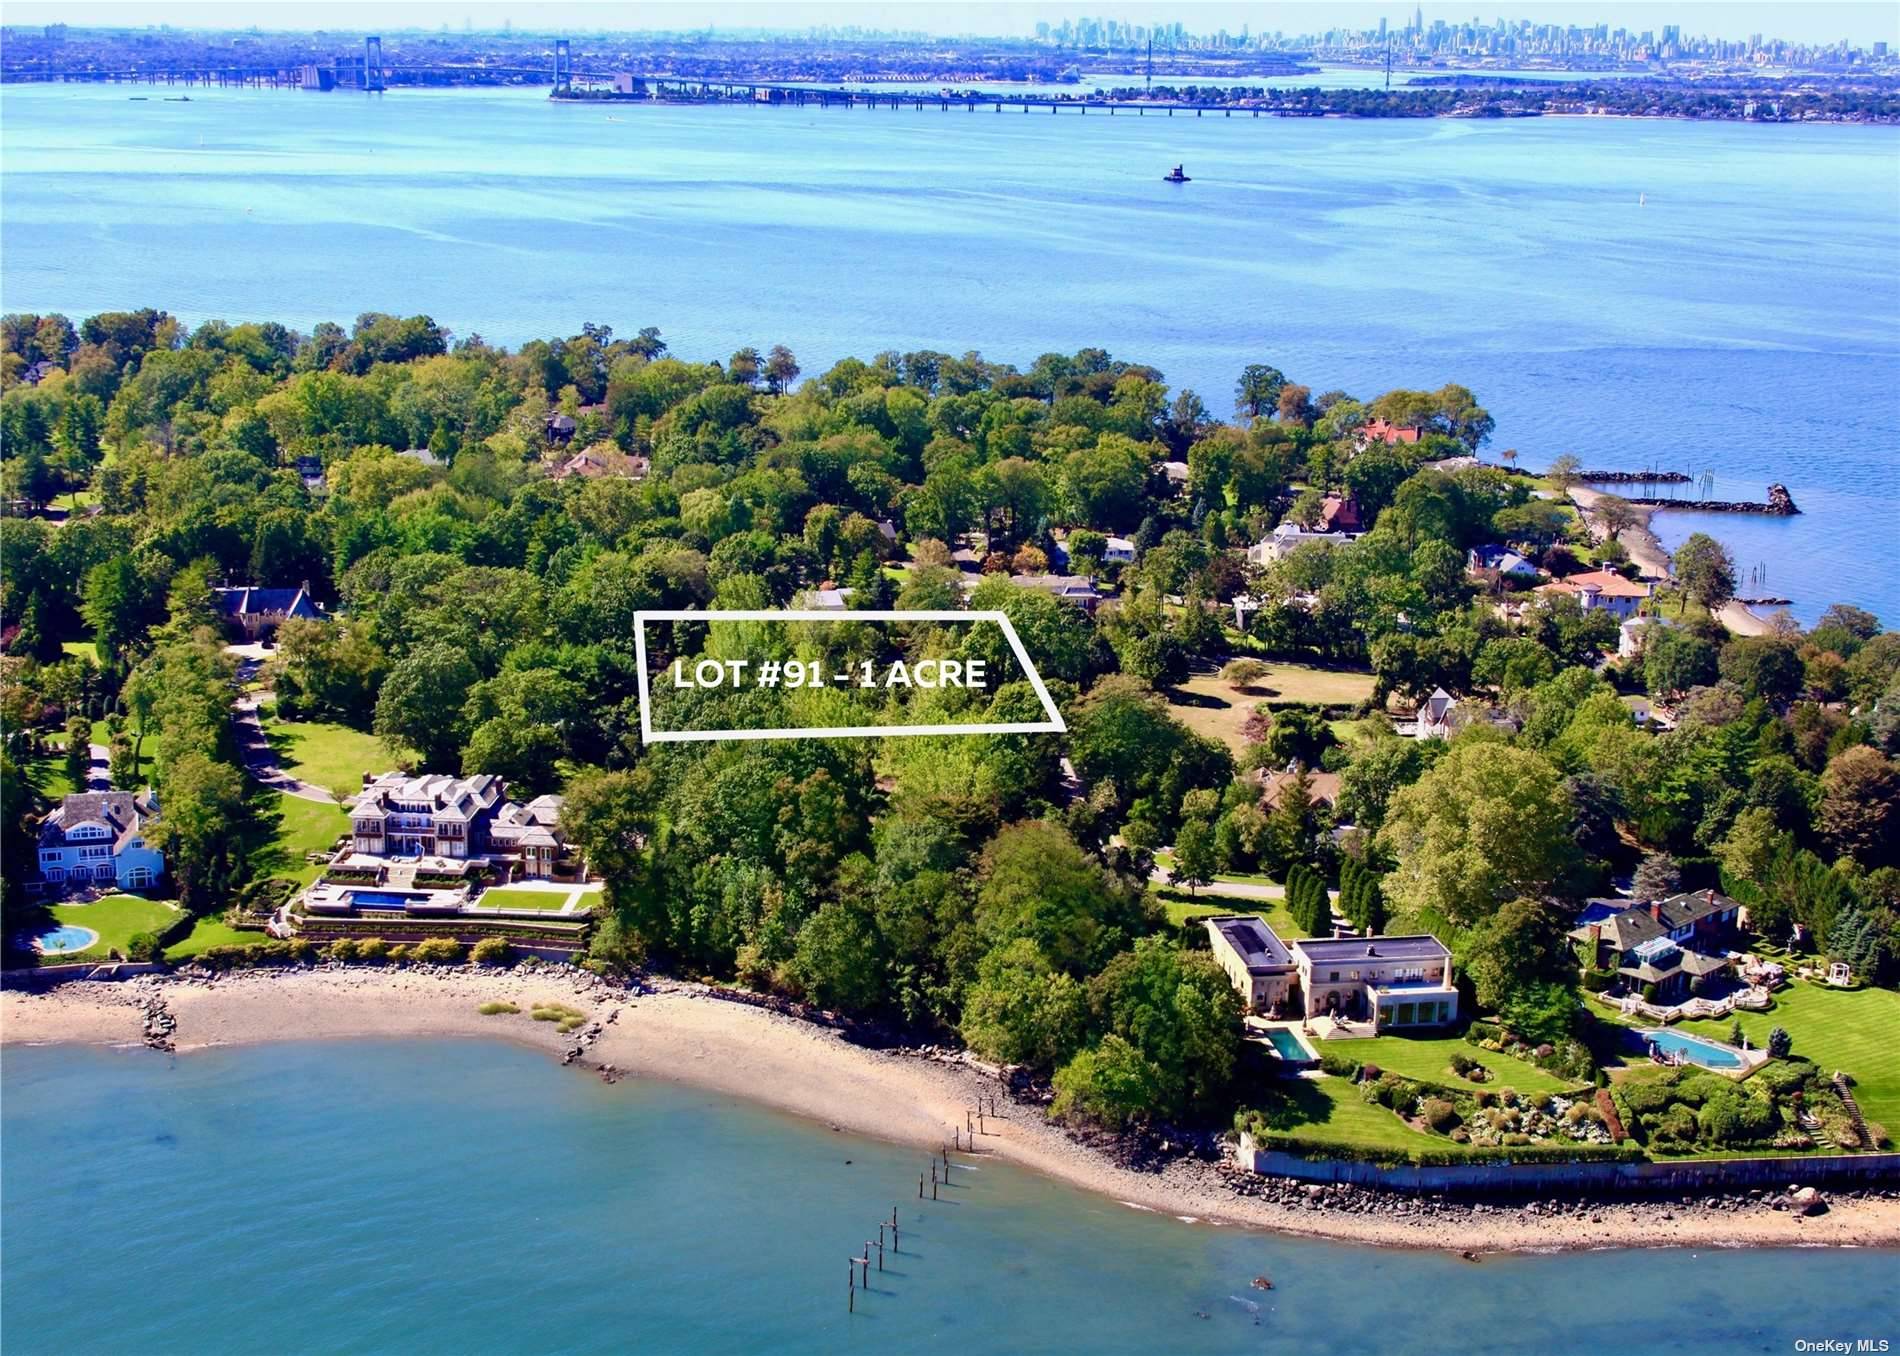 An Expansive acre of prime property, located on one of the most sought after streets in the Village of Kings Point.